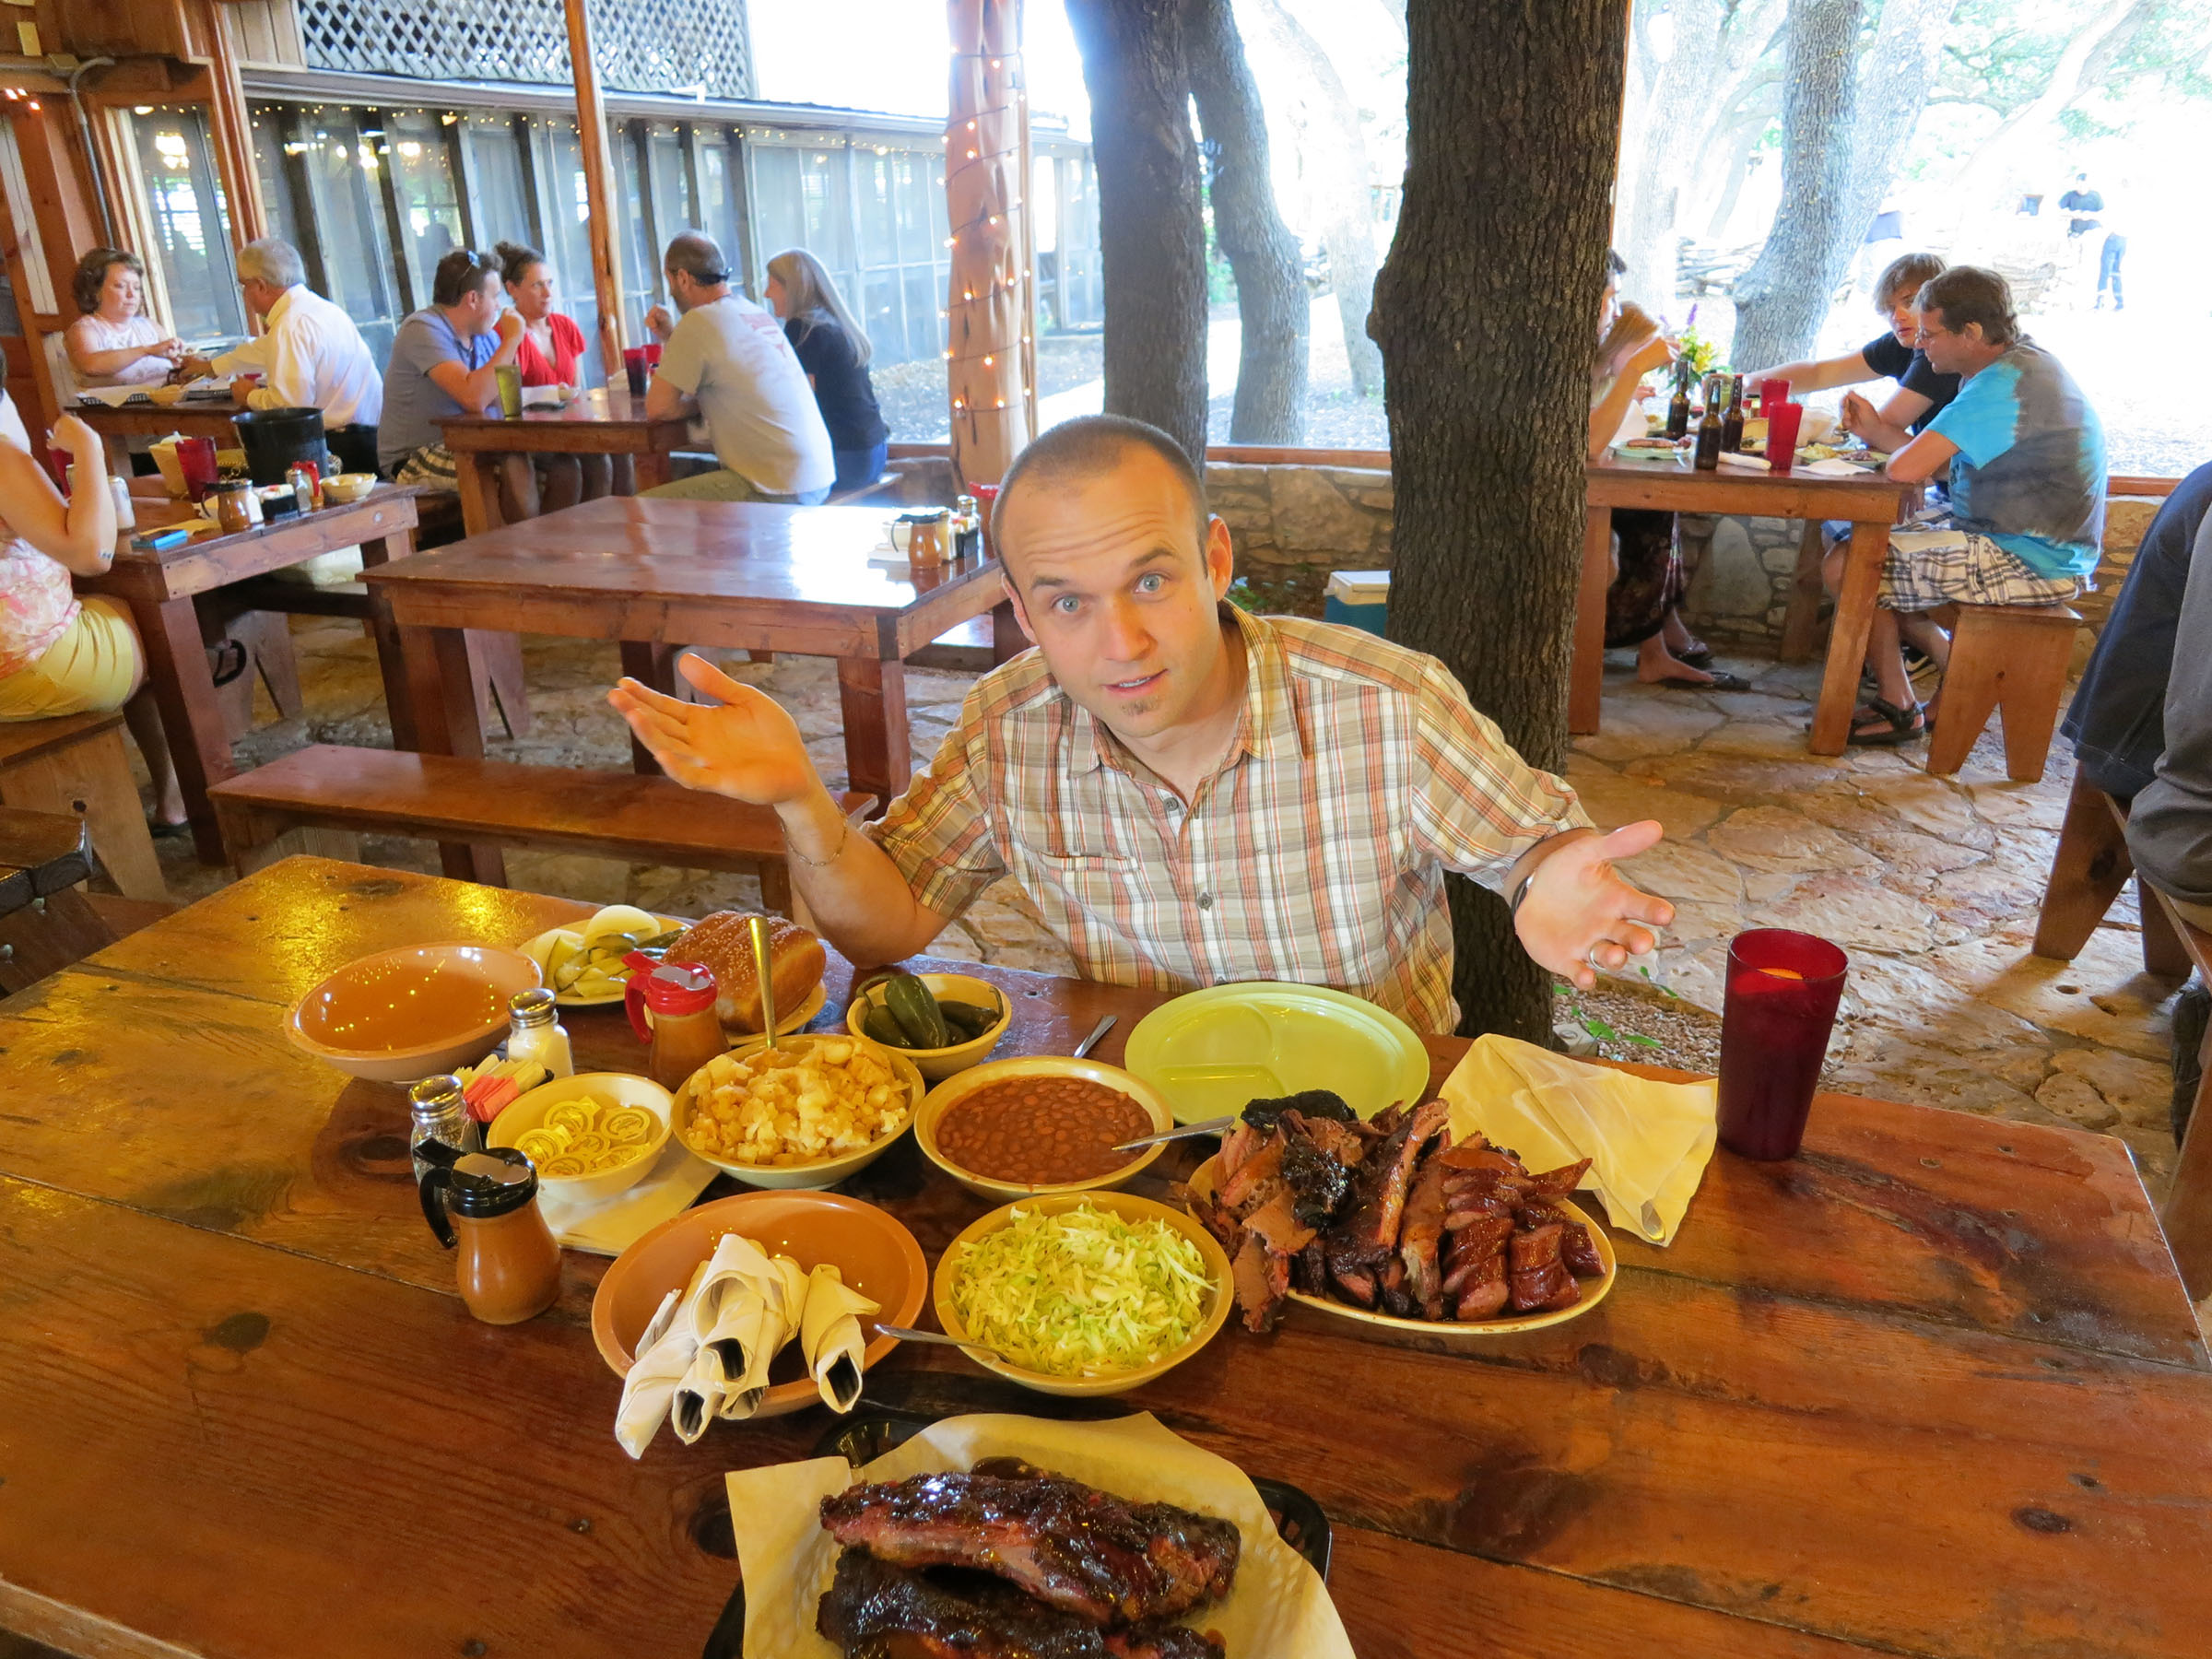 A man sits at a large table with numerous barbecue dishes and sides in an outdoor setting